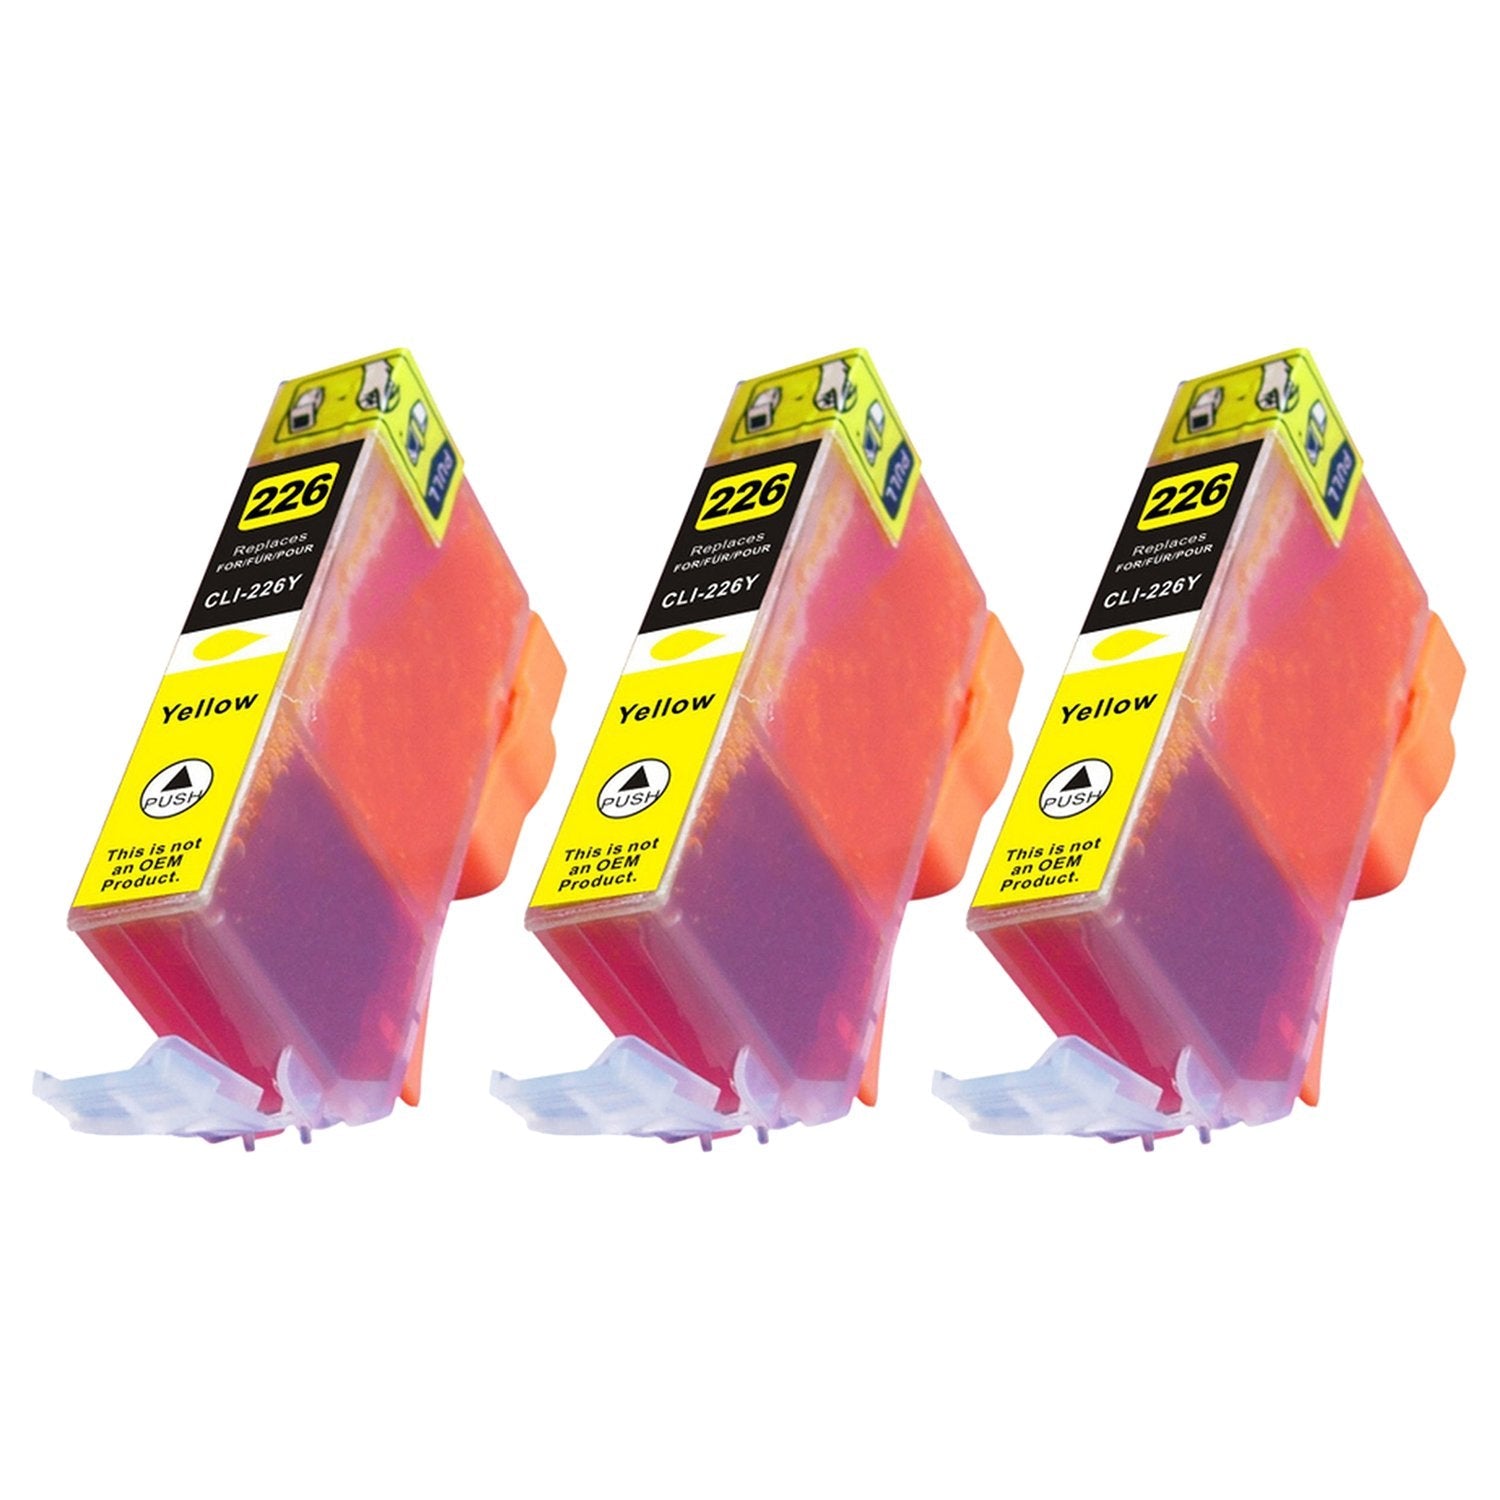 Absolute Toner Canon CLI-226Y (4549B001AA) Compatible Yellow Ink Cartridge | Absolute Toner Canon Ink Cartridges